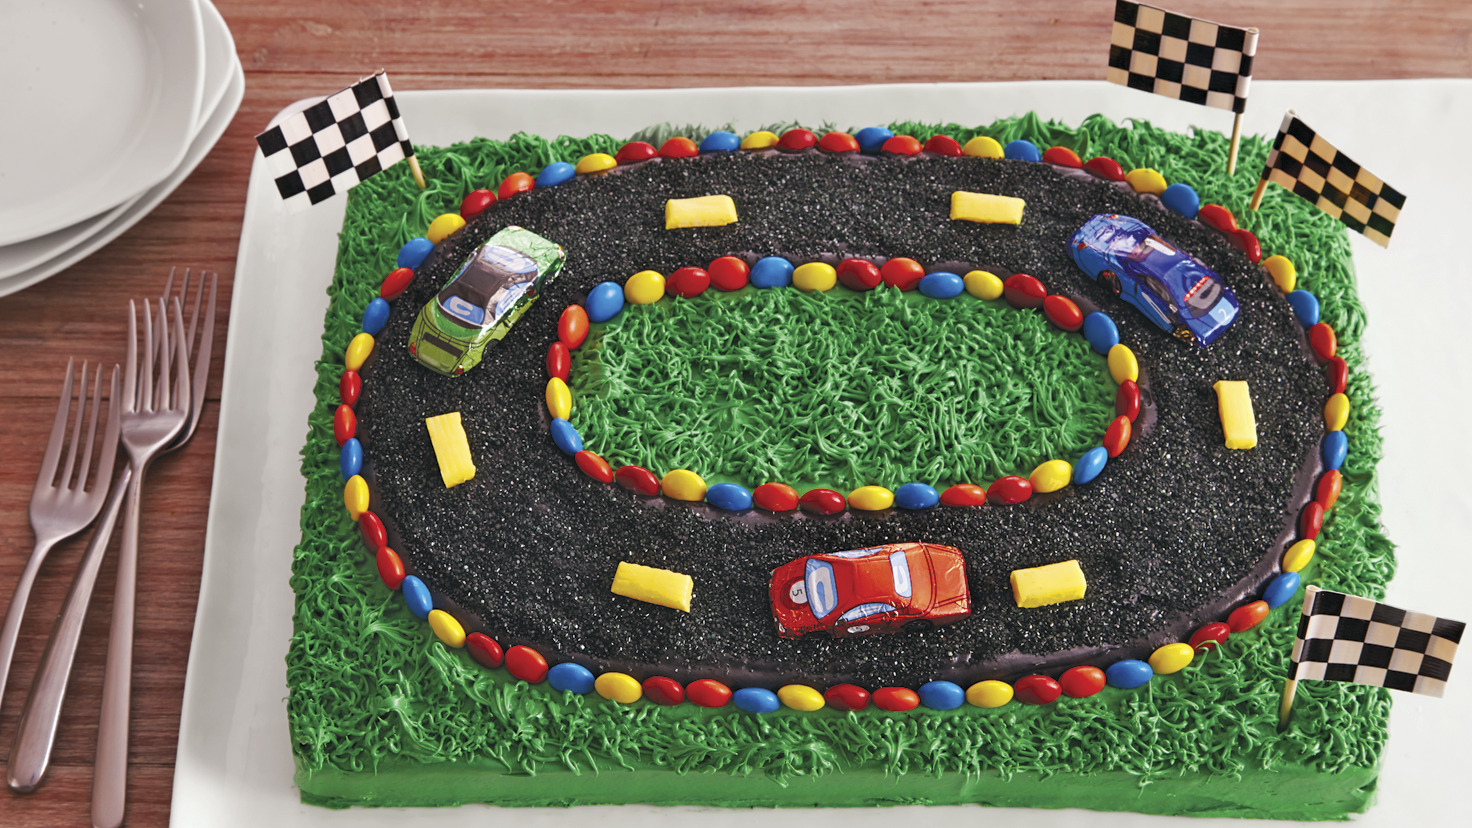 Race track birthday cake Free Photo Download | FreeImages